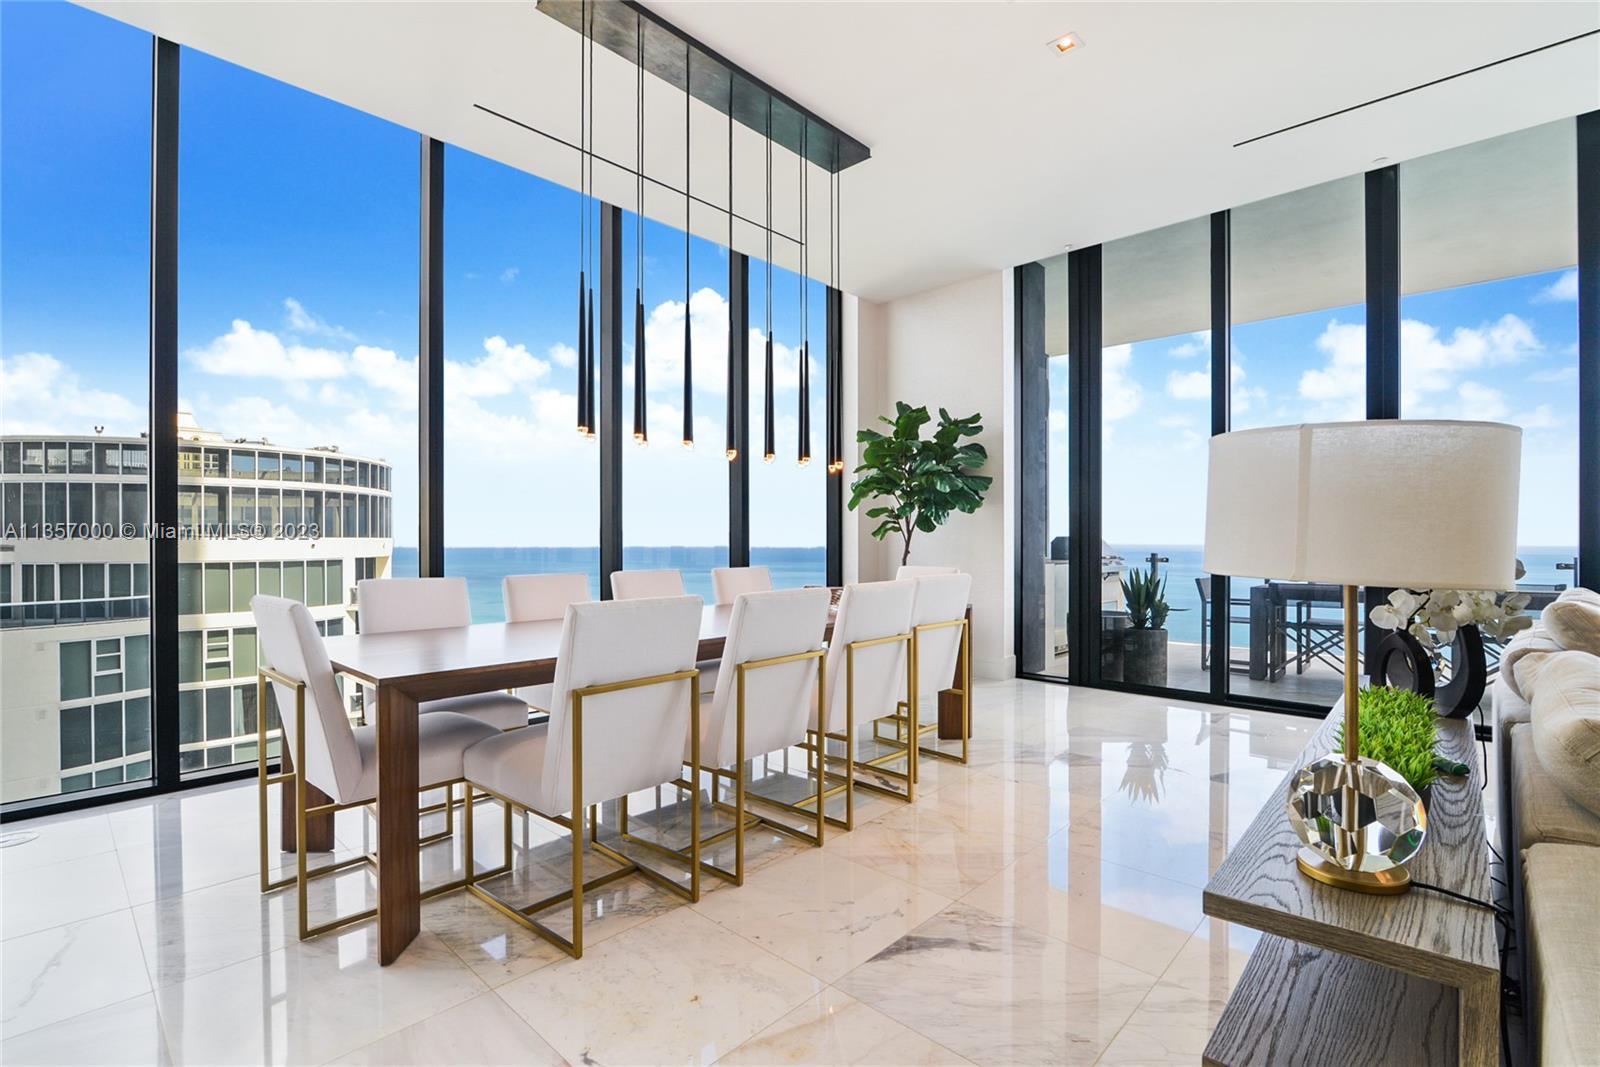 Amazing direct ocean views apartment in Muse Sunny isles Beach. 3 Bed, 3.5 bath +12' ceilings and fl